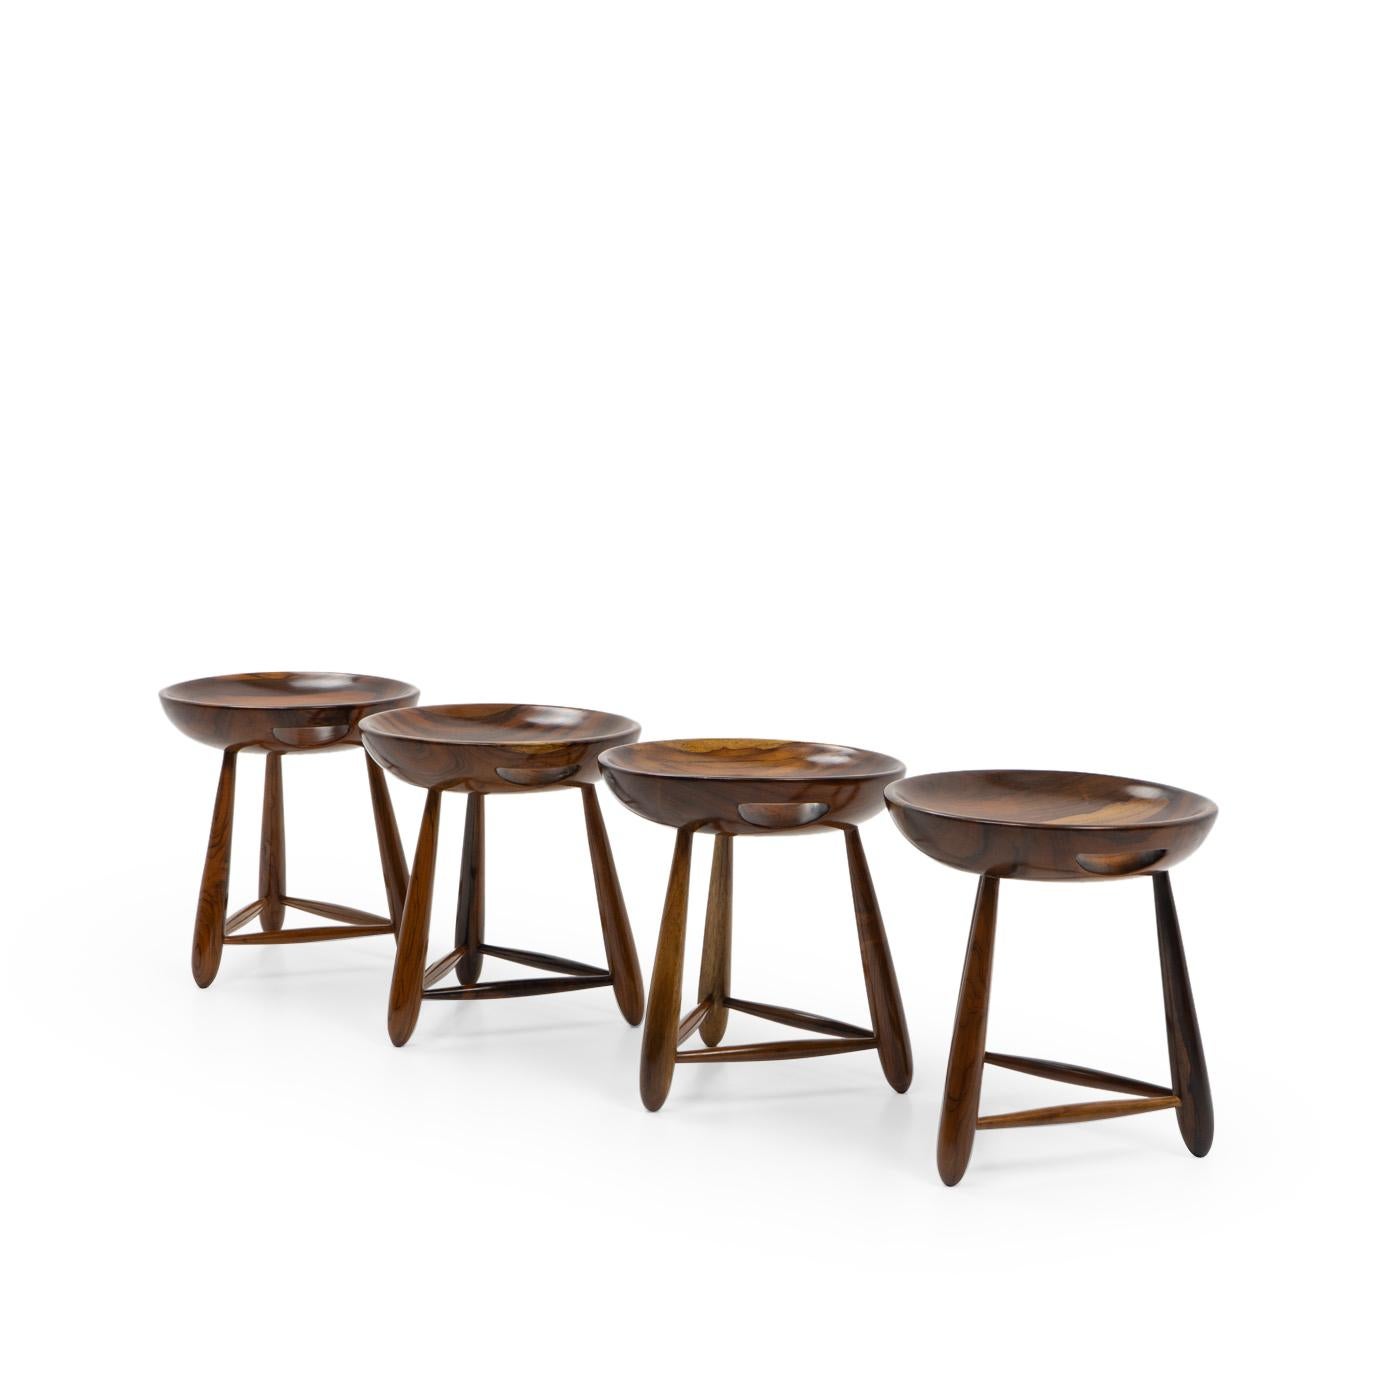 Sergio Rodrigues set the standard for Modern furniture in Brazil during the 1950s. His works have become a reference for Brazilian design, which often use indigenous hardwood species.

One of his most iconic designs is the Mocho stool:

Our version